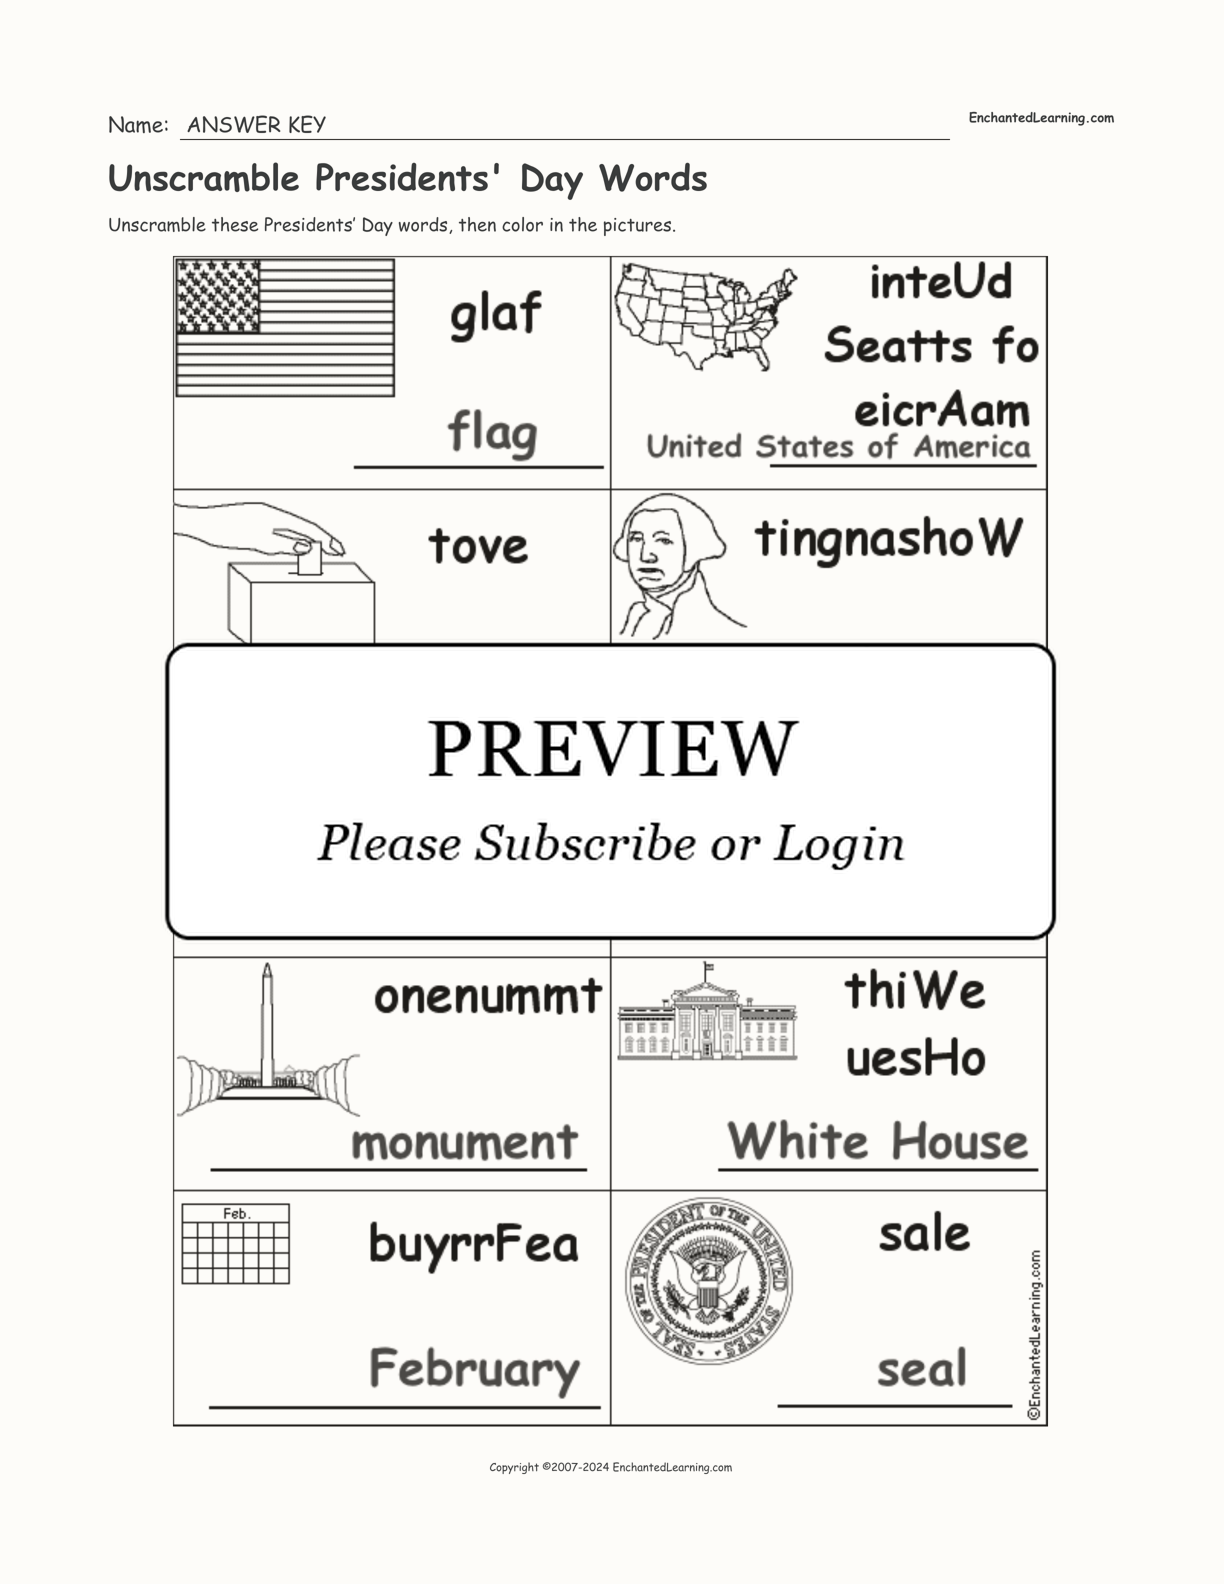 unscramble-presidents-day-words-enchanted-learning